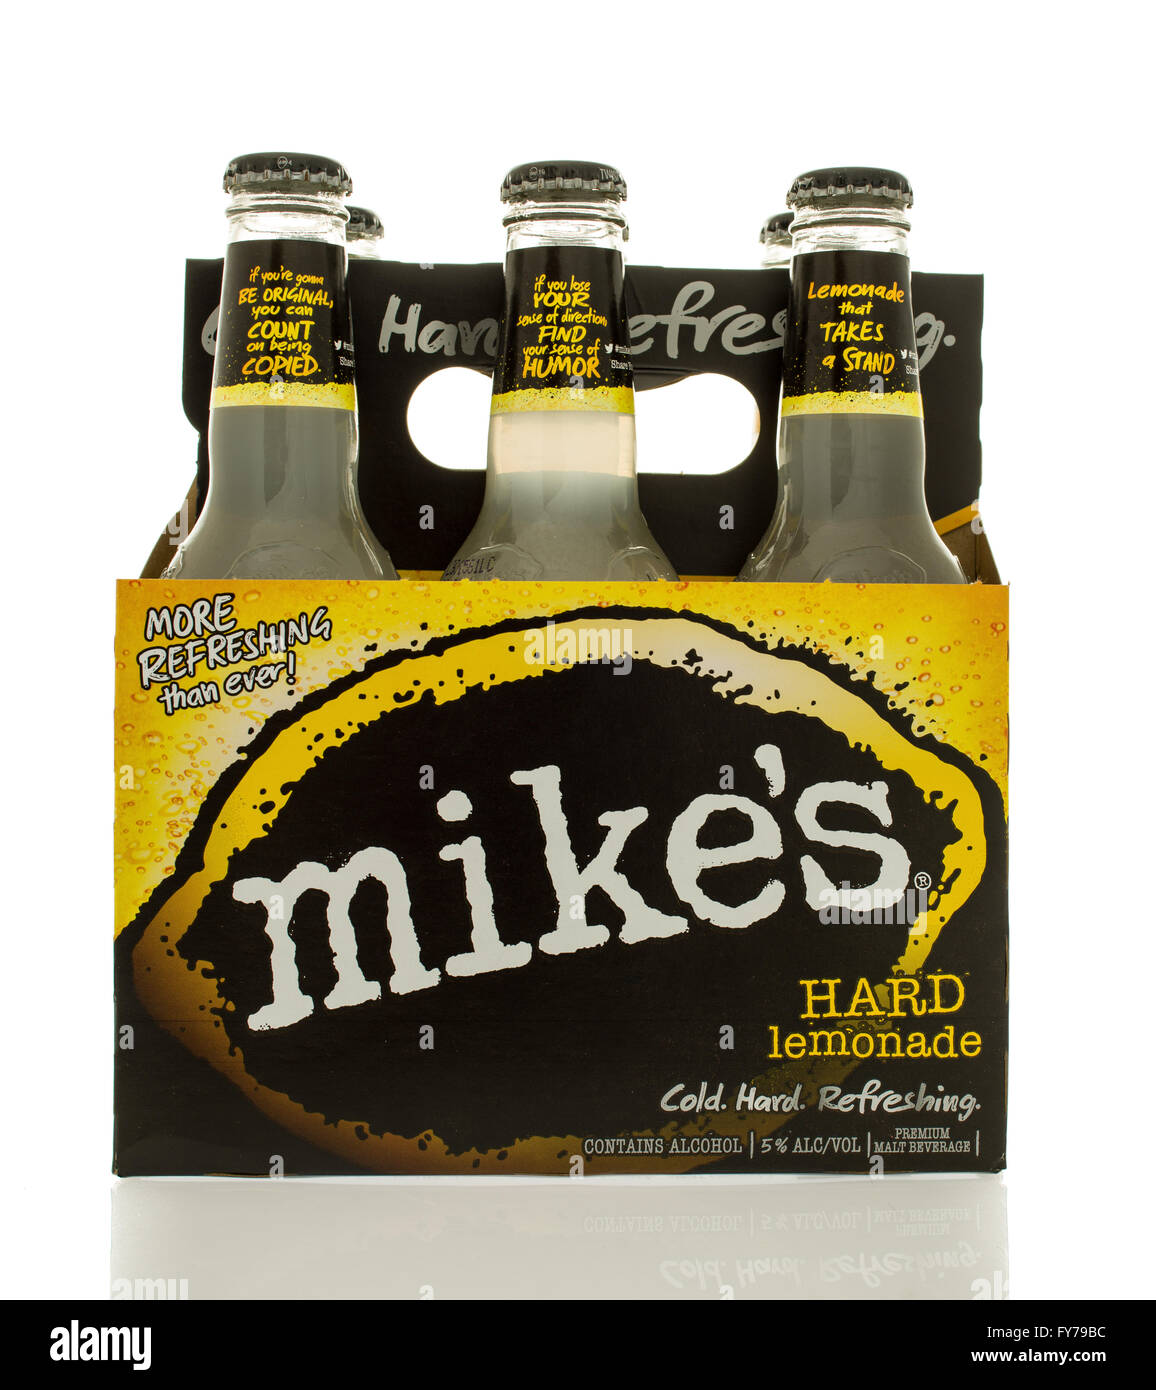 Winneconne, WI - 2 March 2016:  A six pack of Mikes hard lemonade. Stock Photo